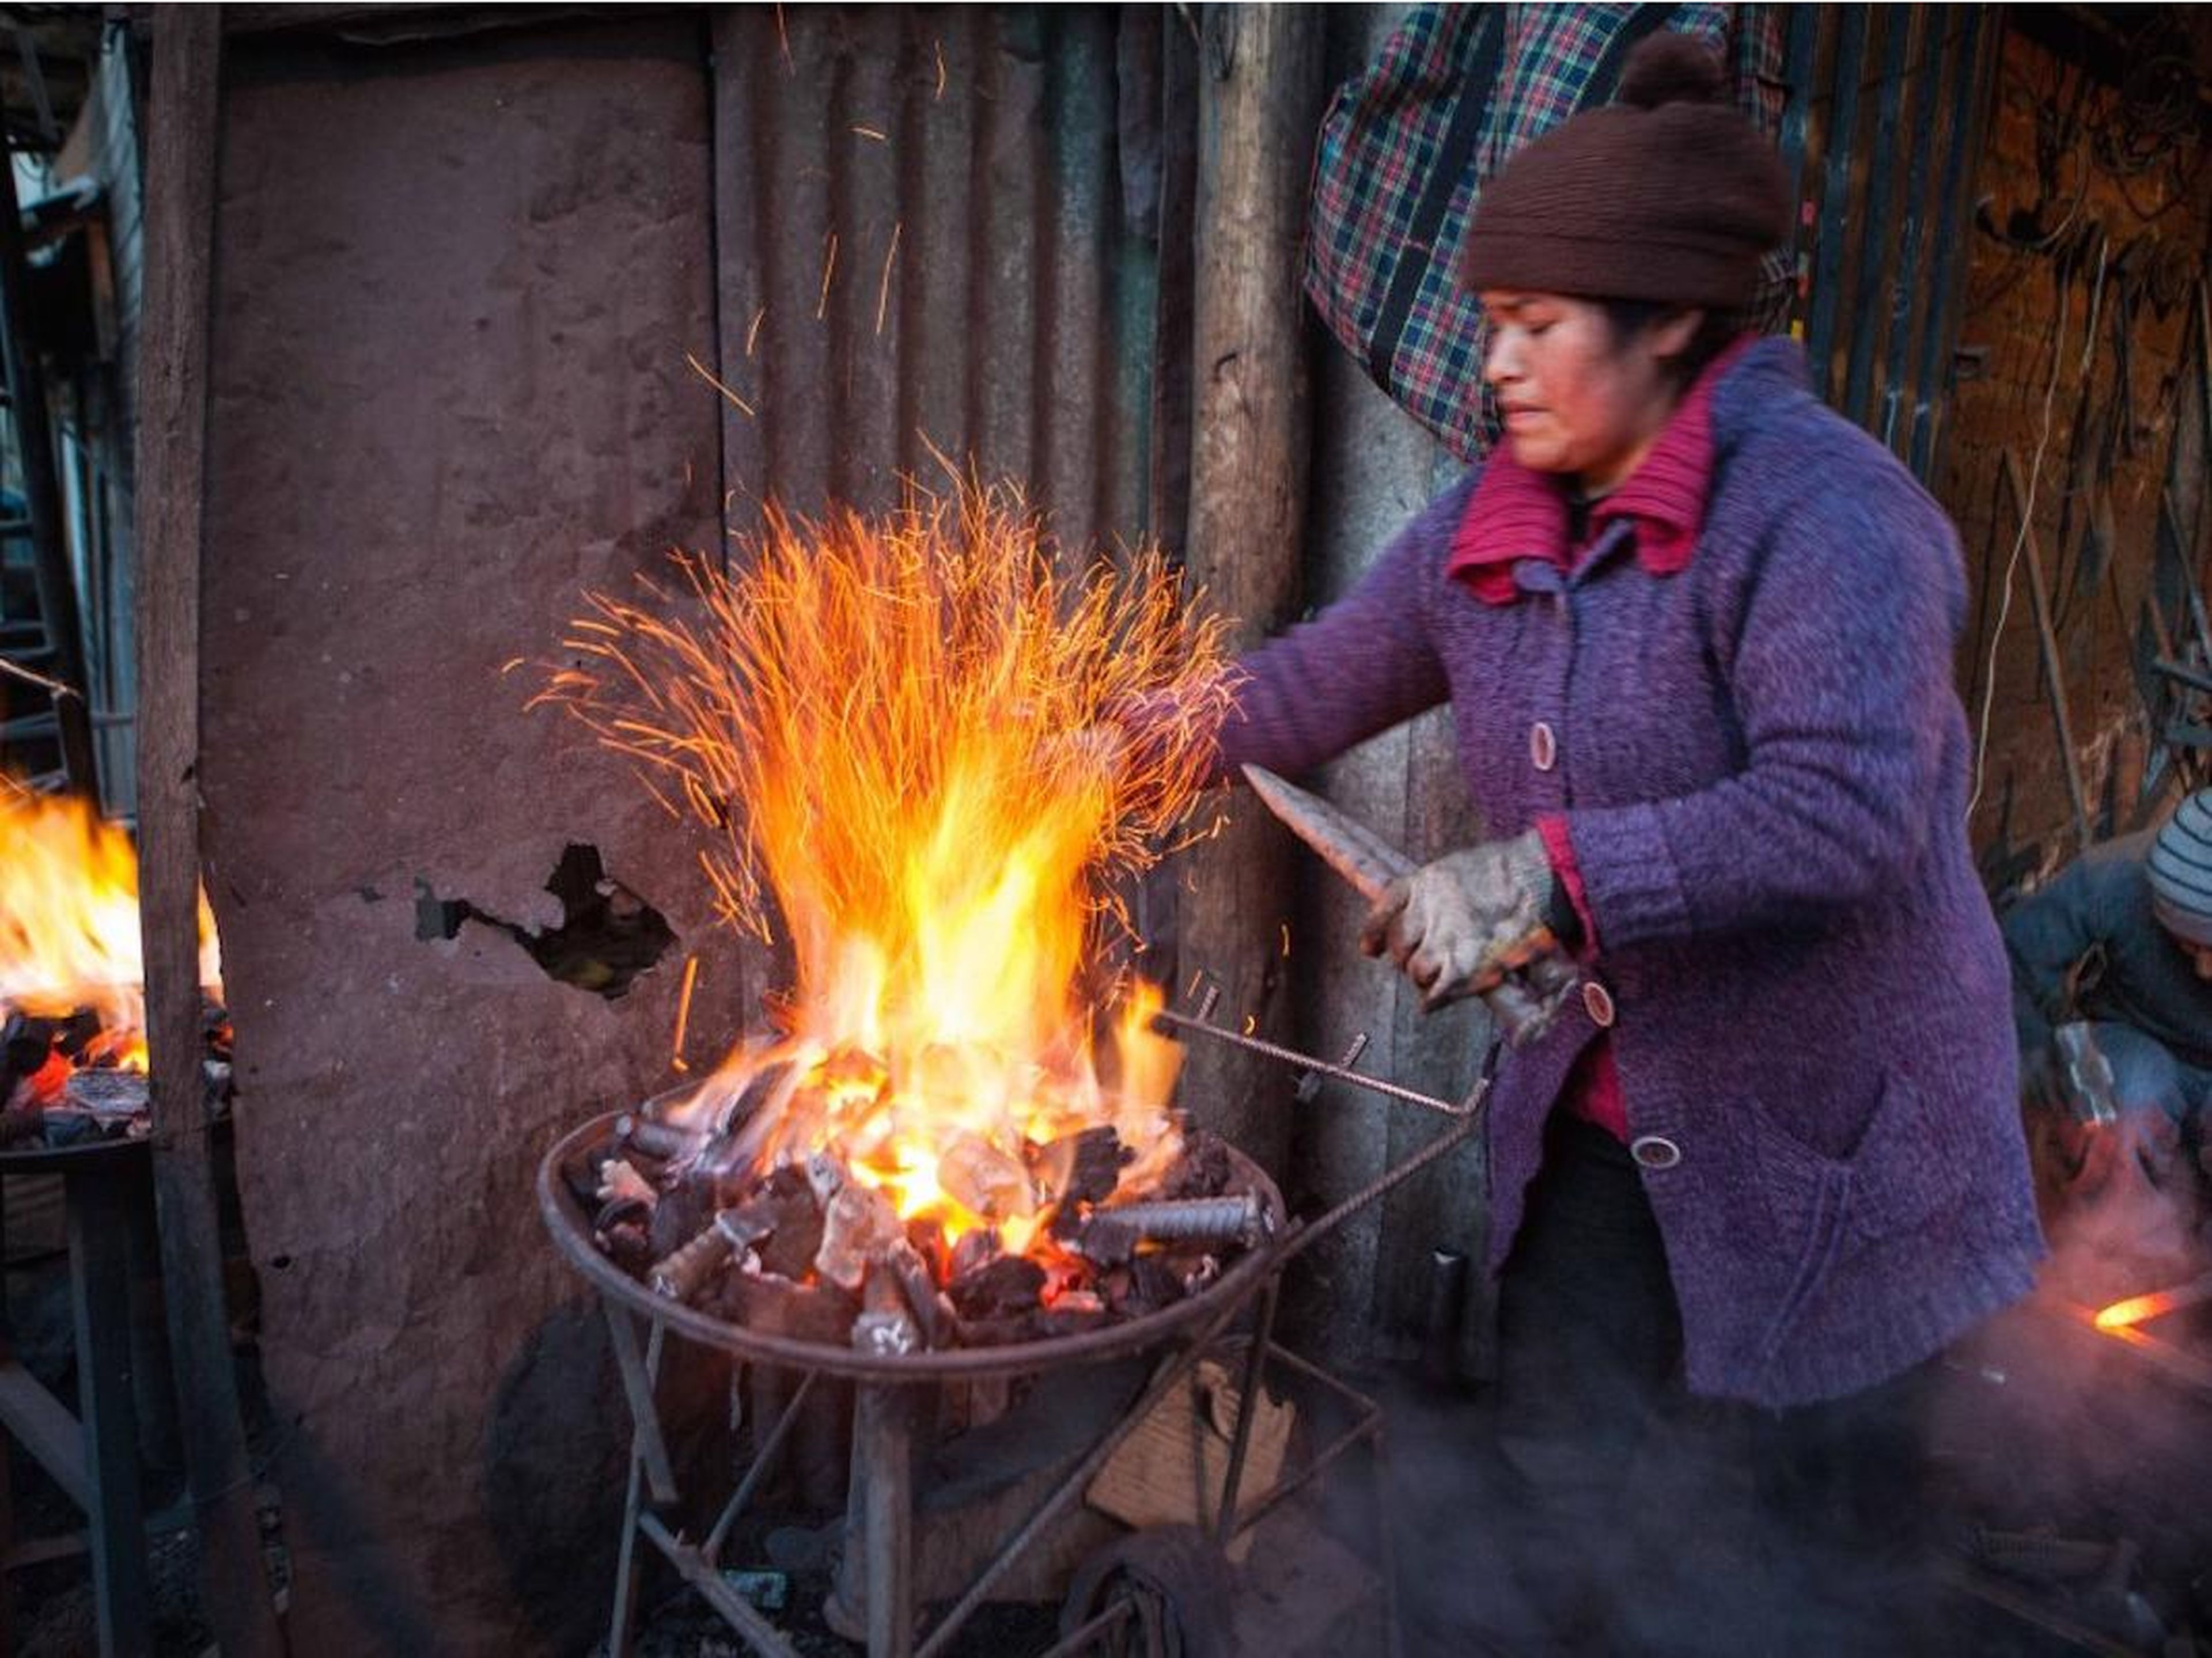 Women aren’t allowed to enter the mines, so they do the outdoor work. This woman is creating the metal parts required to prop up the mining tunnels.